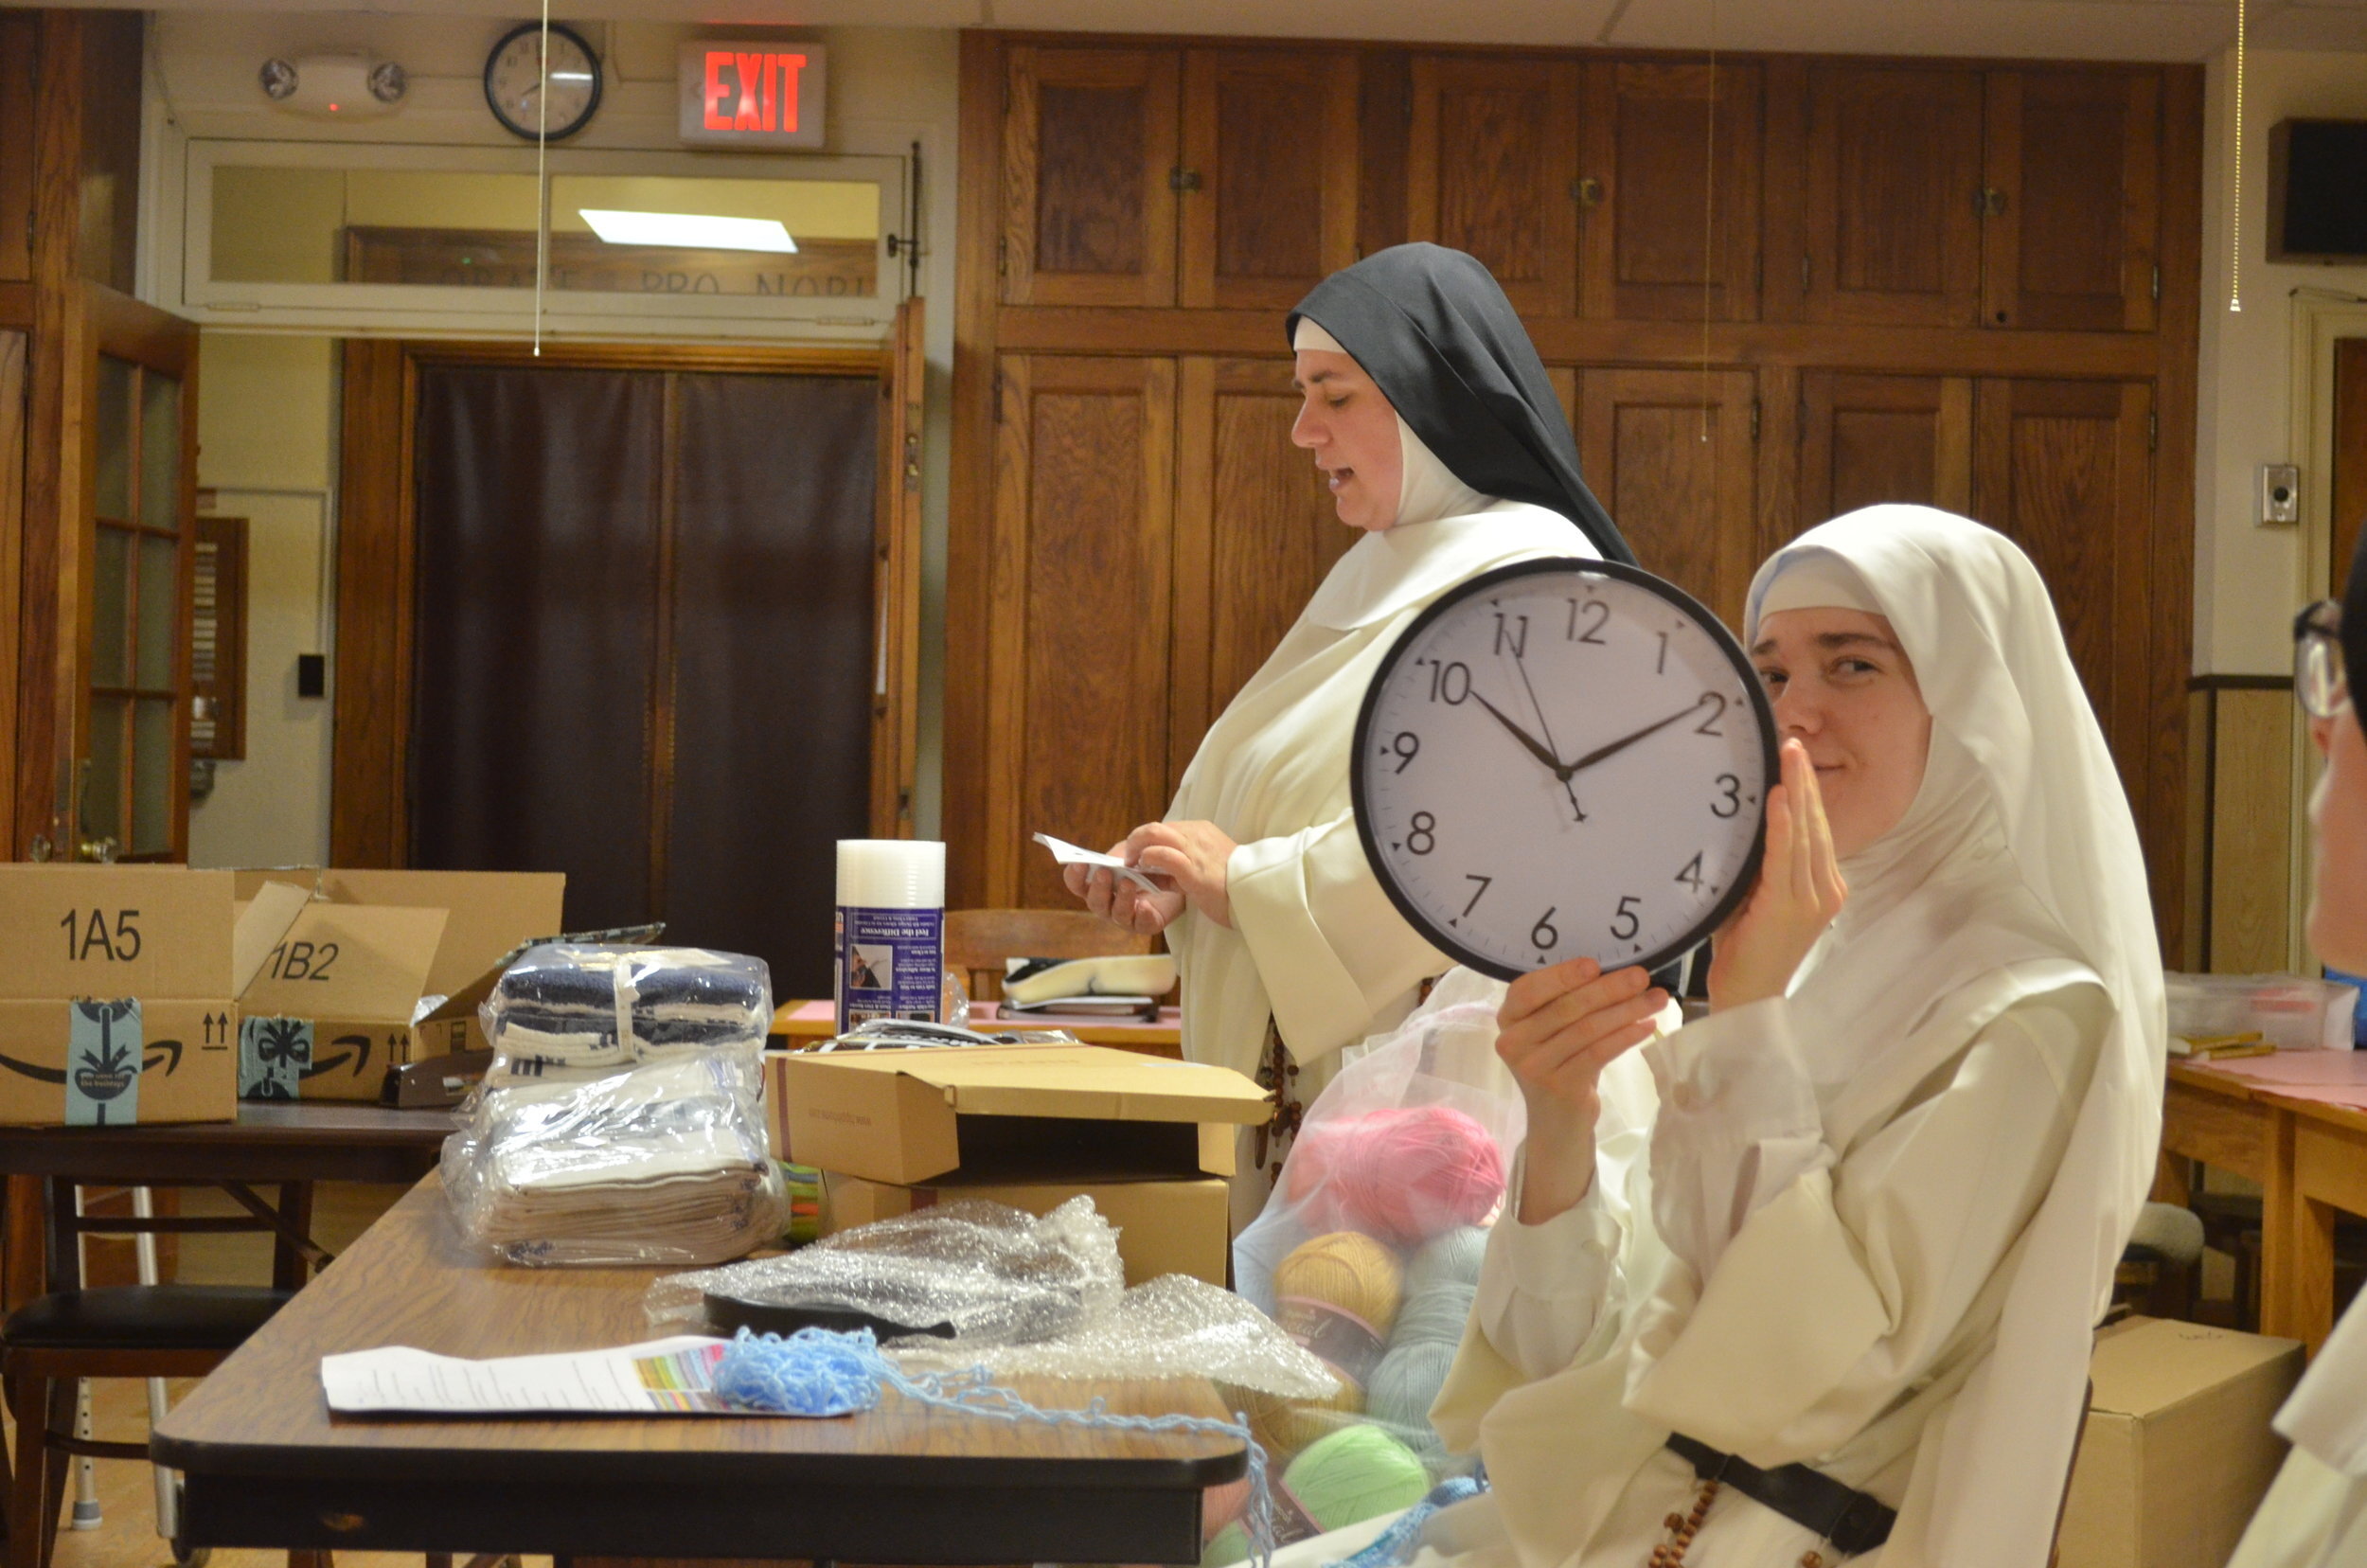 Sr. Lucia Marie shows off one of the clocks